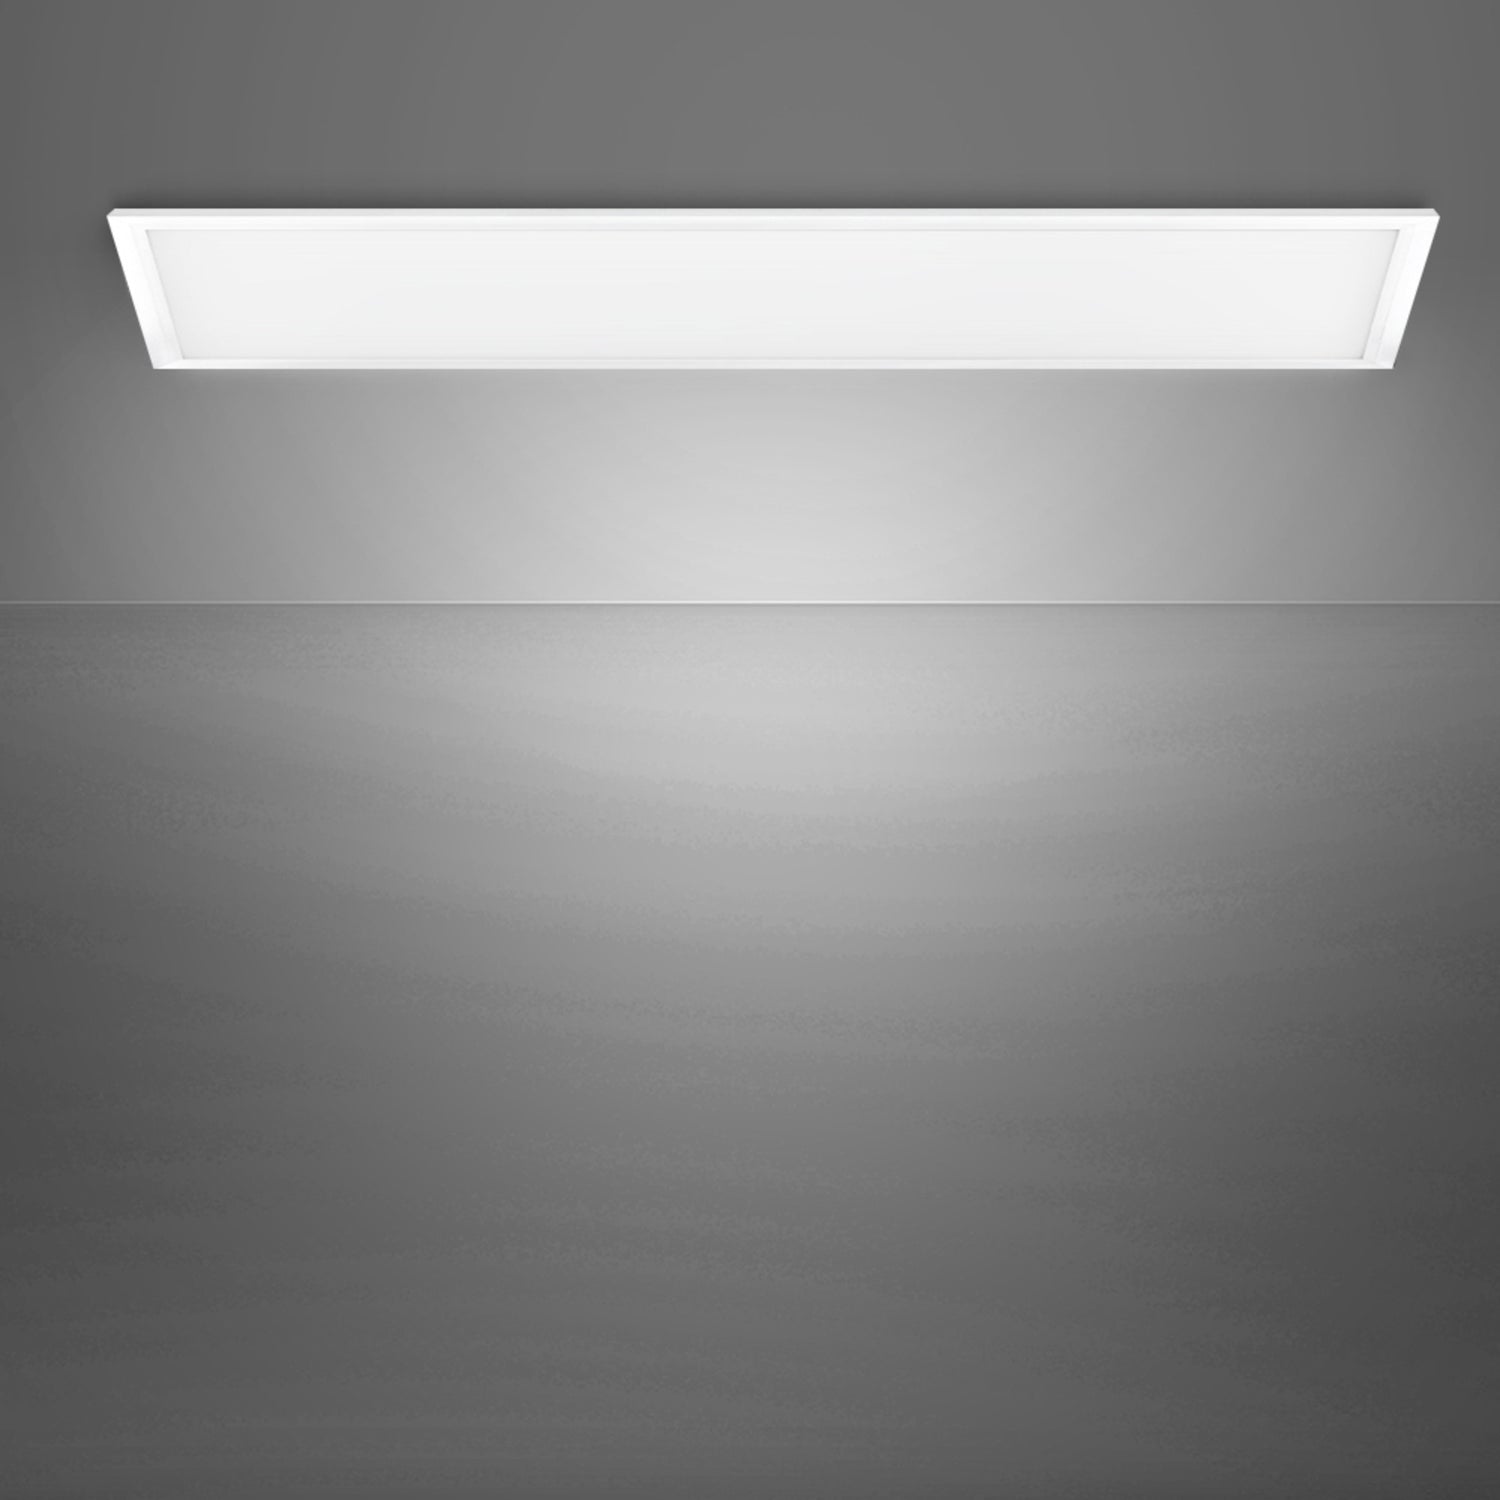 1 ft. x 4 ft. 50W Cool White (4000K) Dimmable LED Flat Panel Ceiling Light